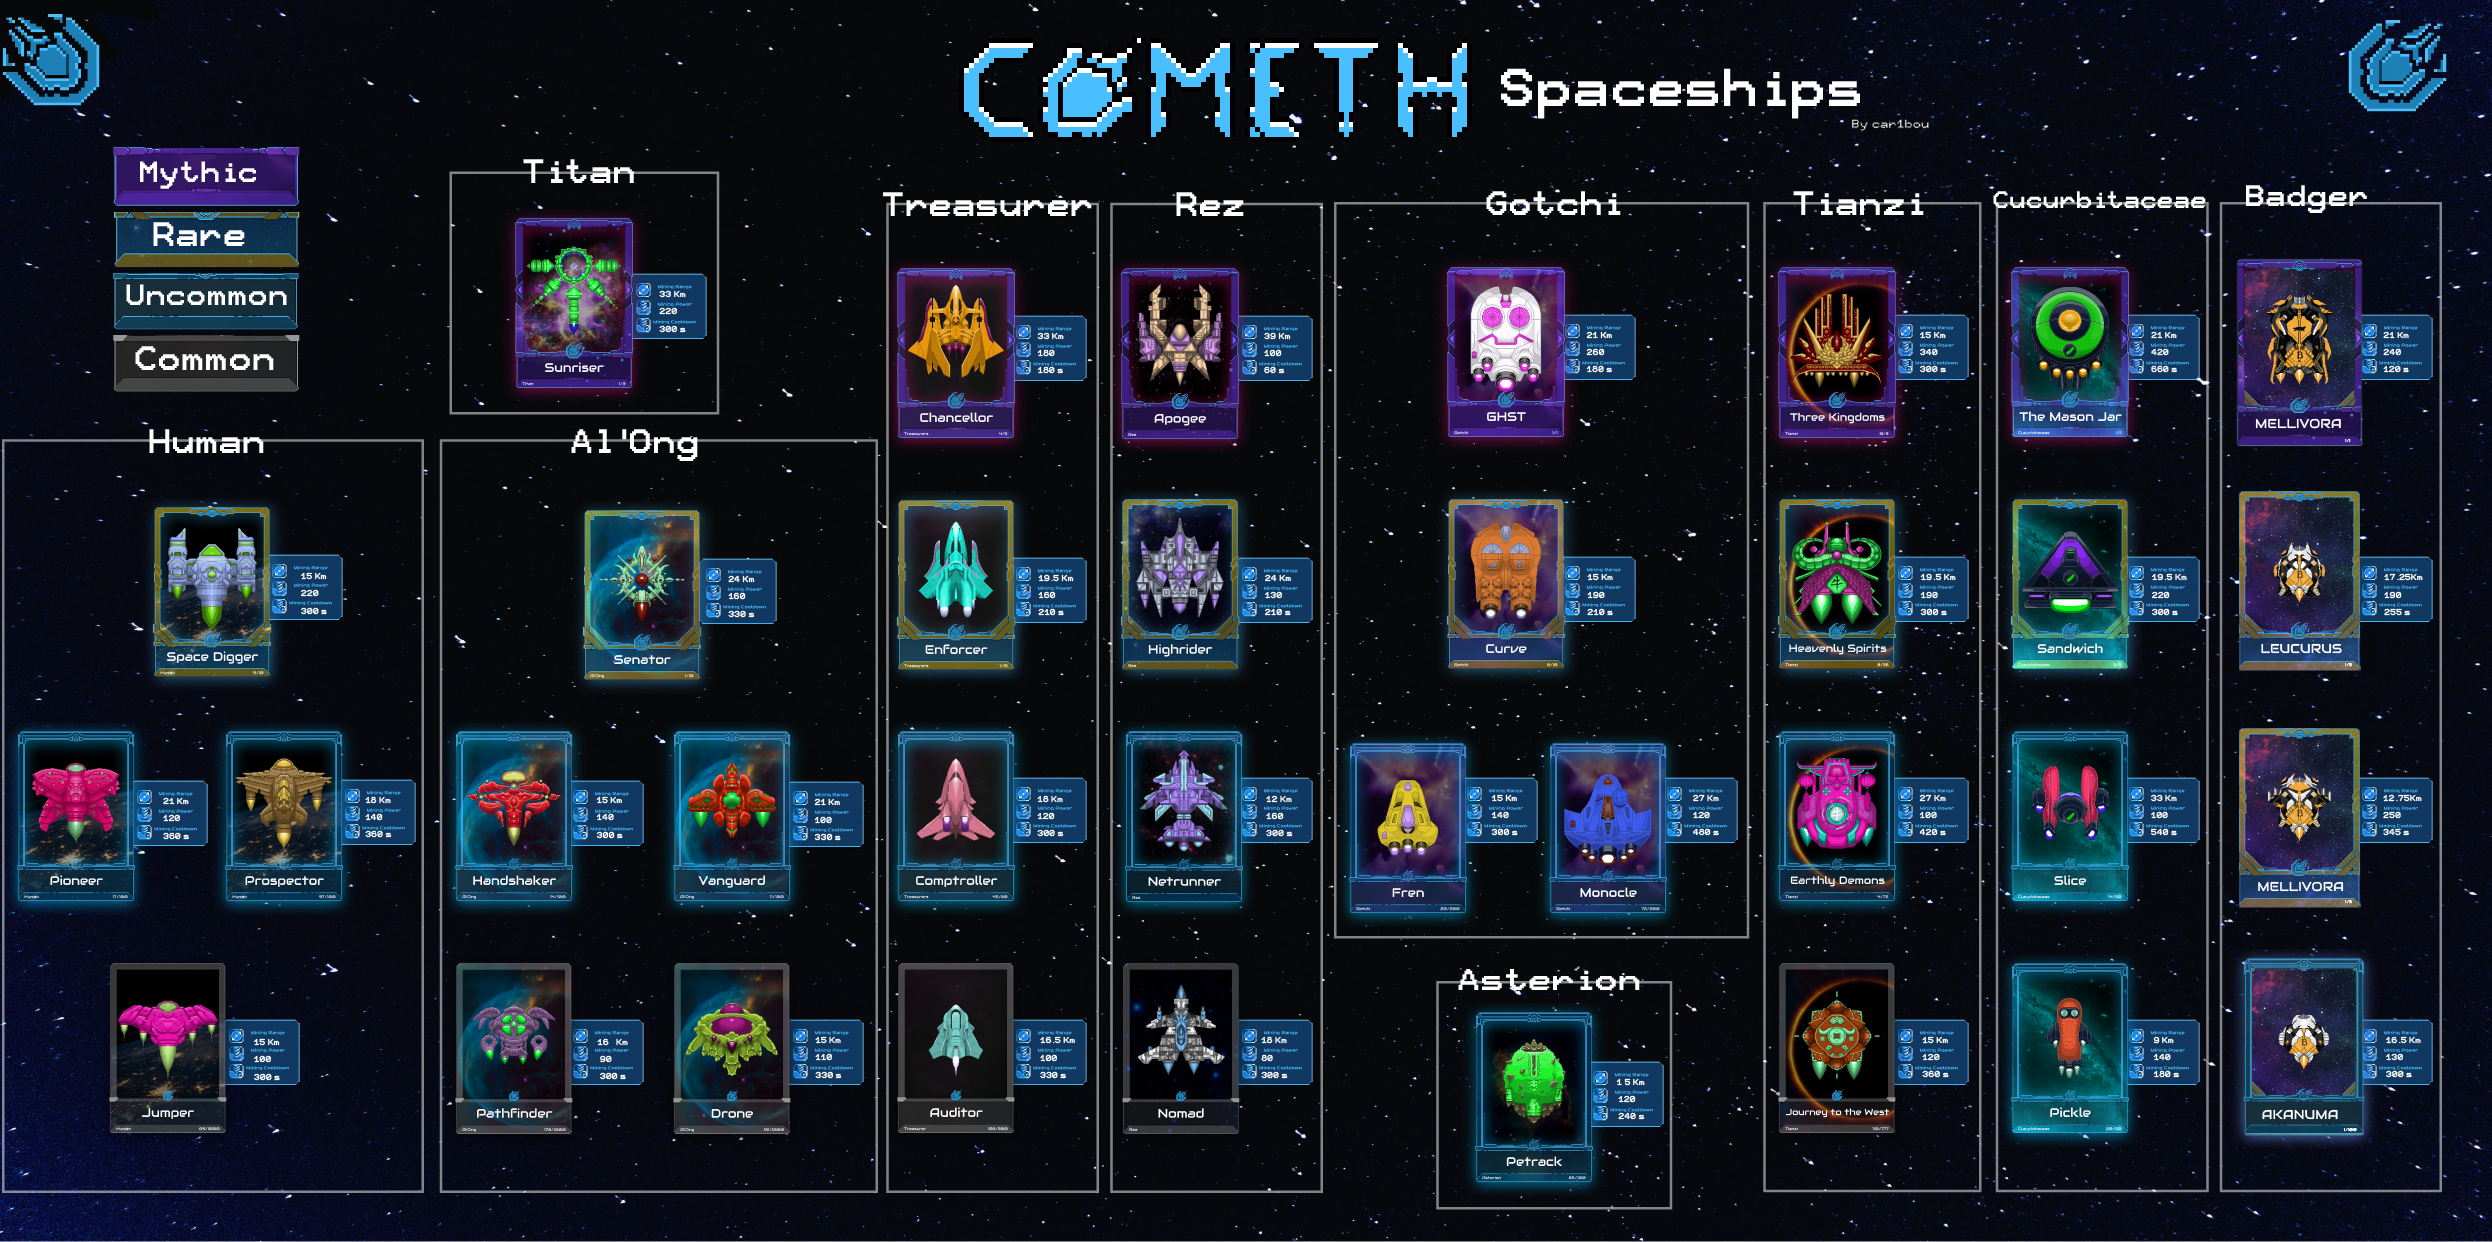 Cometh Spaceships in all their glory!